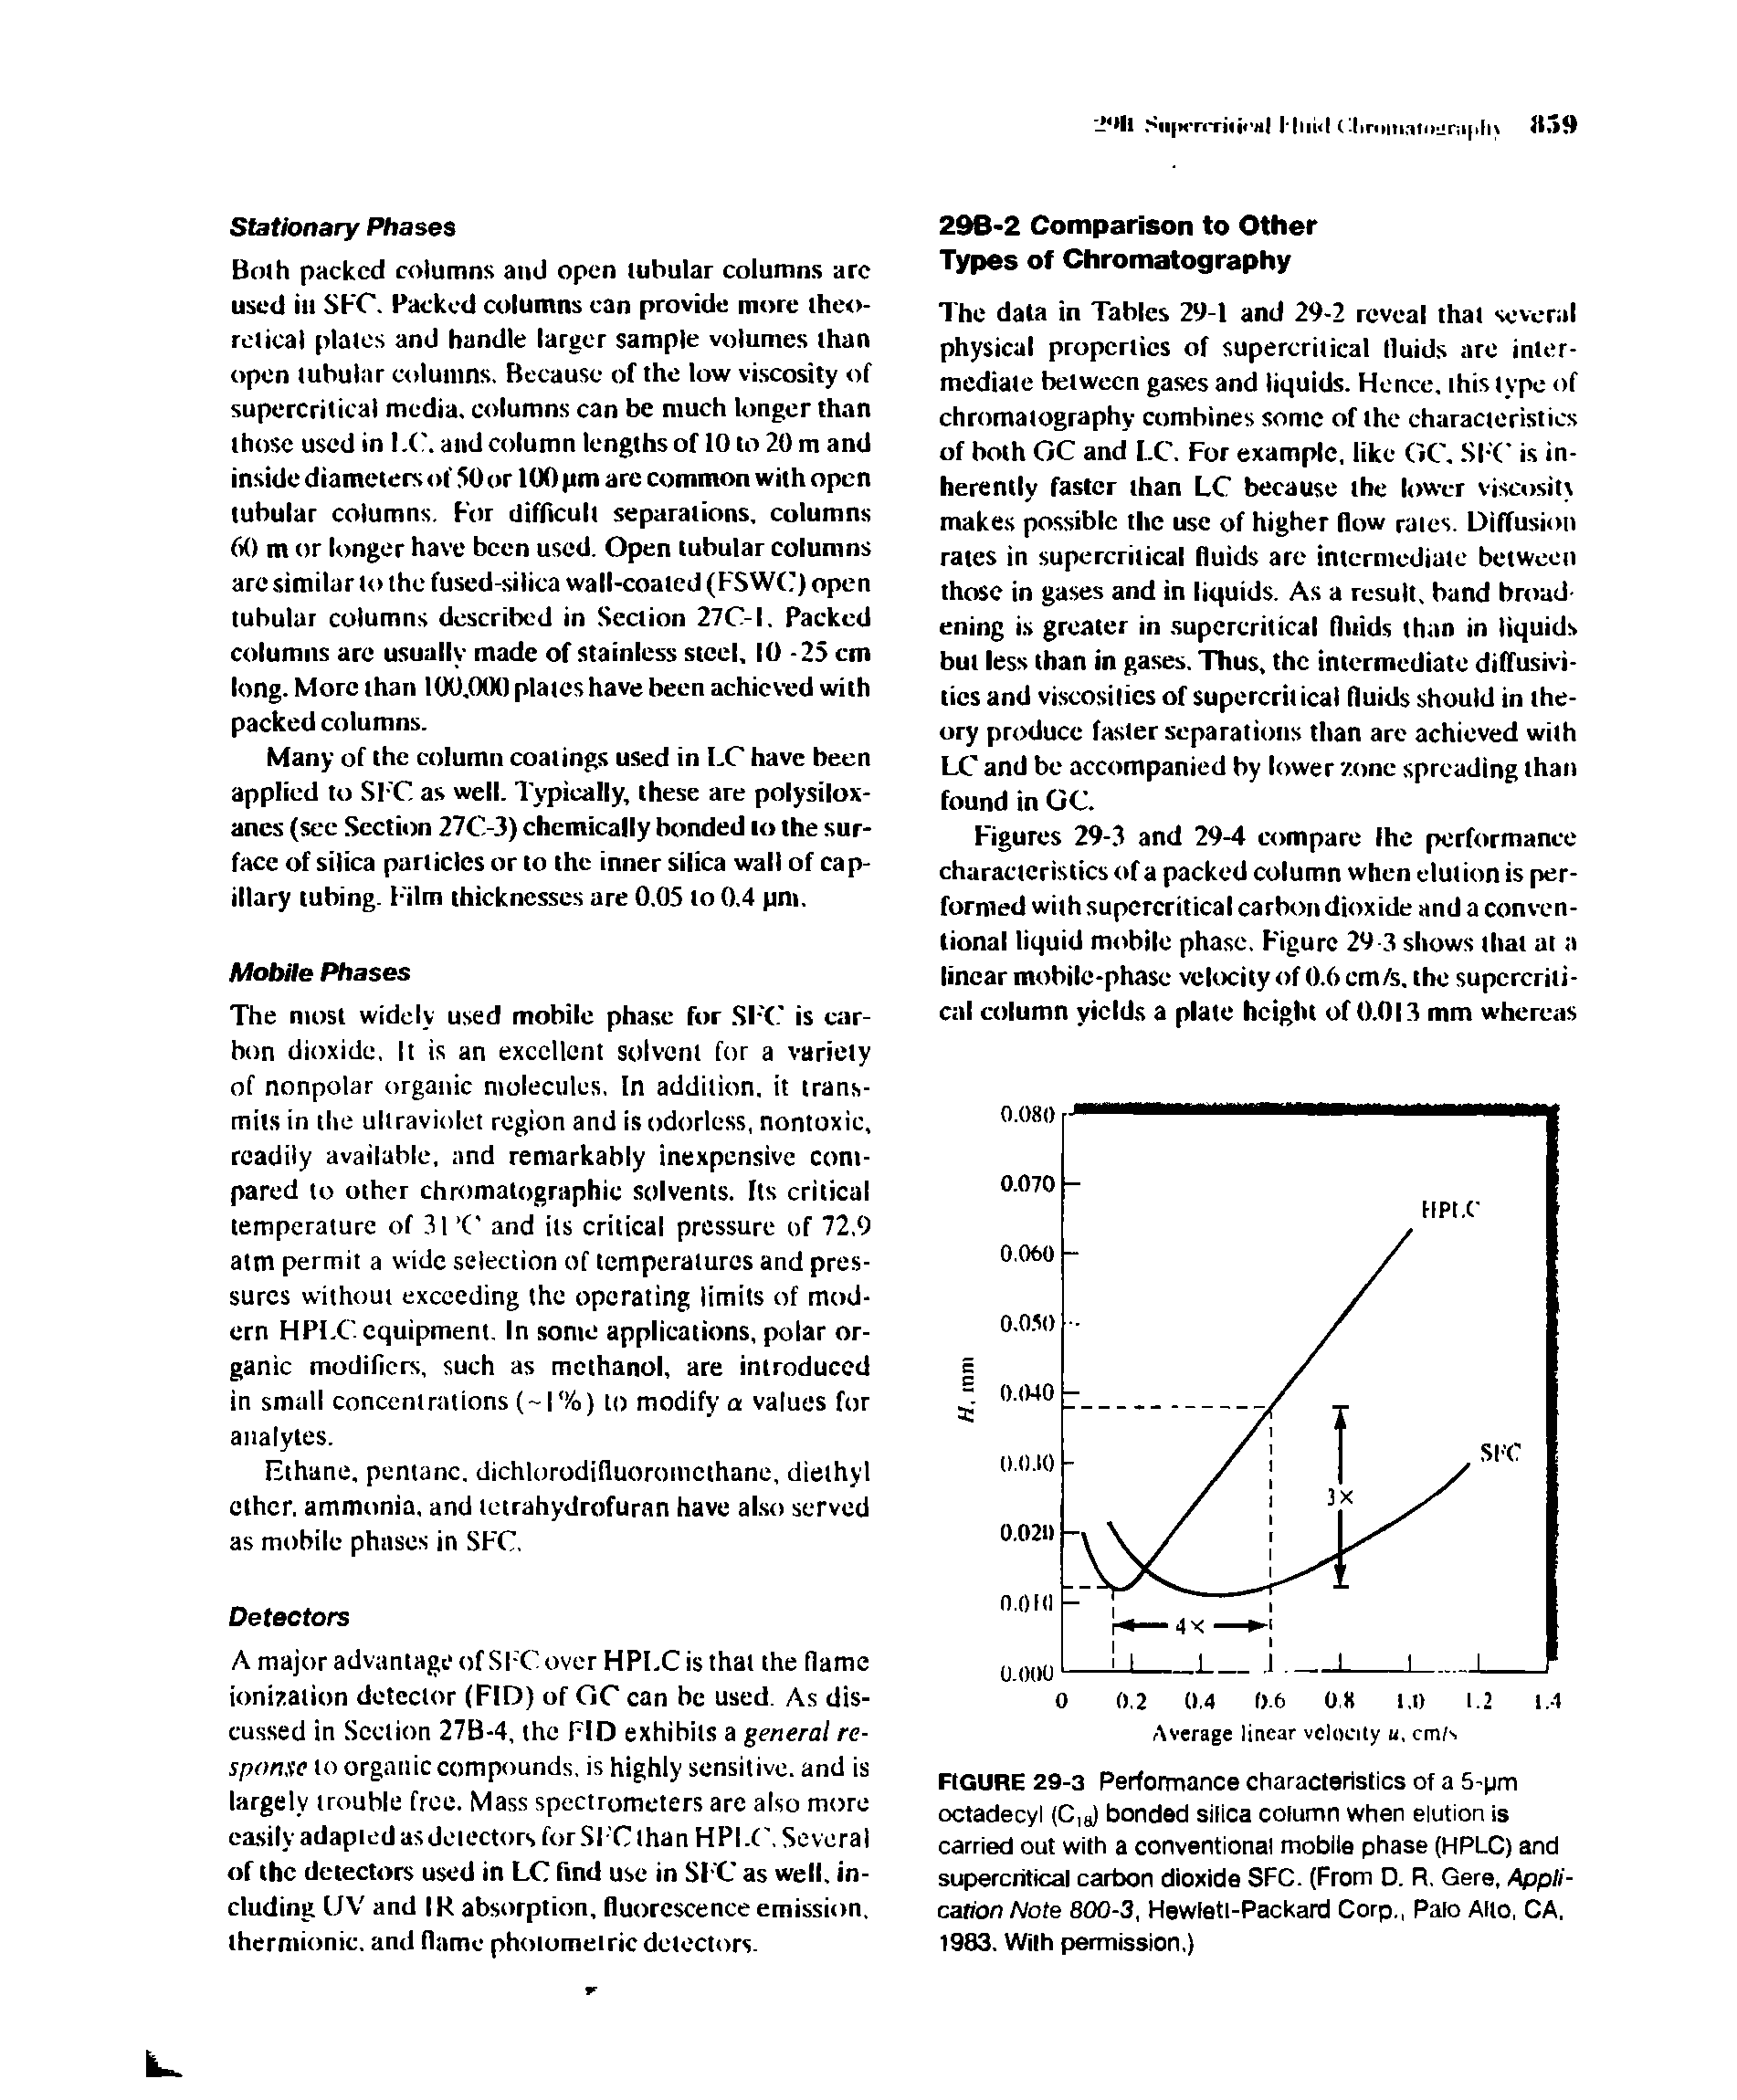 Figures 29-.3 and 29-4 compare Ihe performance characteristics of a packed column when elution is performed with supercritical carbon dioxide and a conventional liquid mobile phase. Figure 29 3 shows that at a linear mobile-phase velocity of 0.6 cm/s. the supercritical column yields a plate height of 0.013 mm whereas...